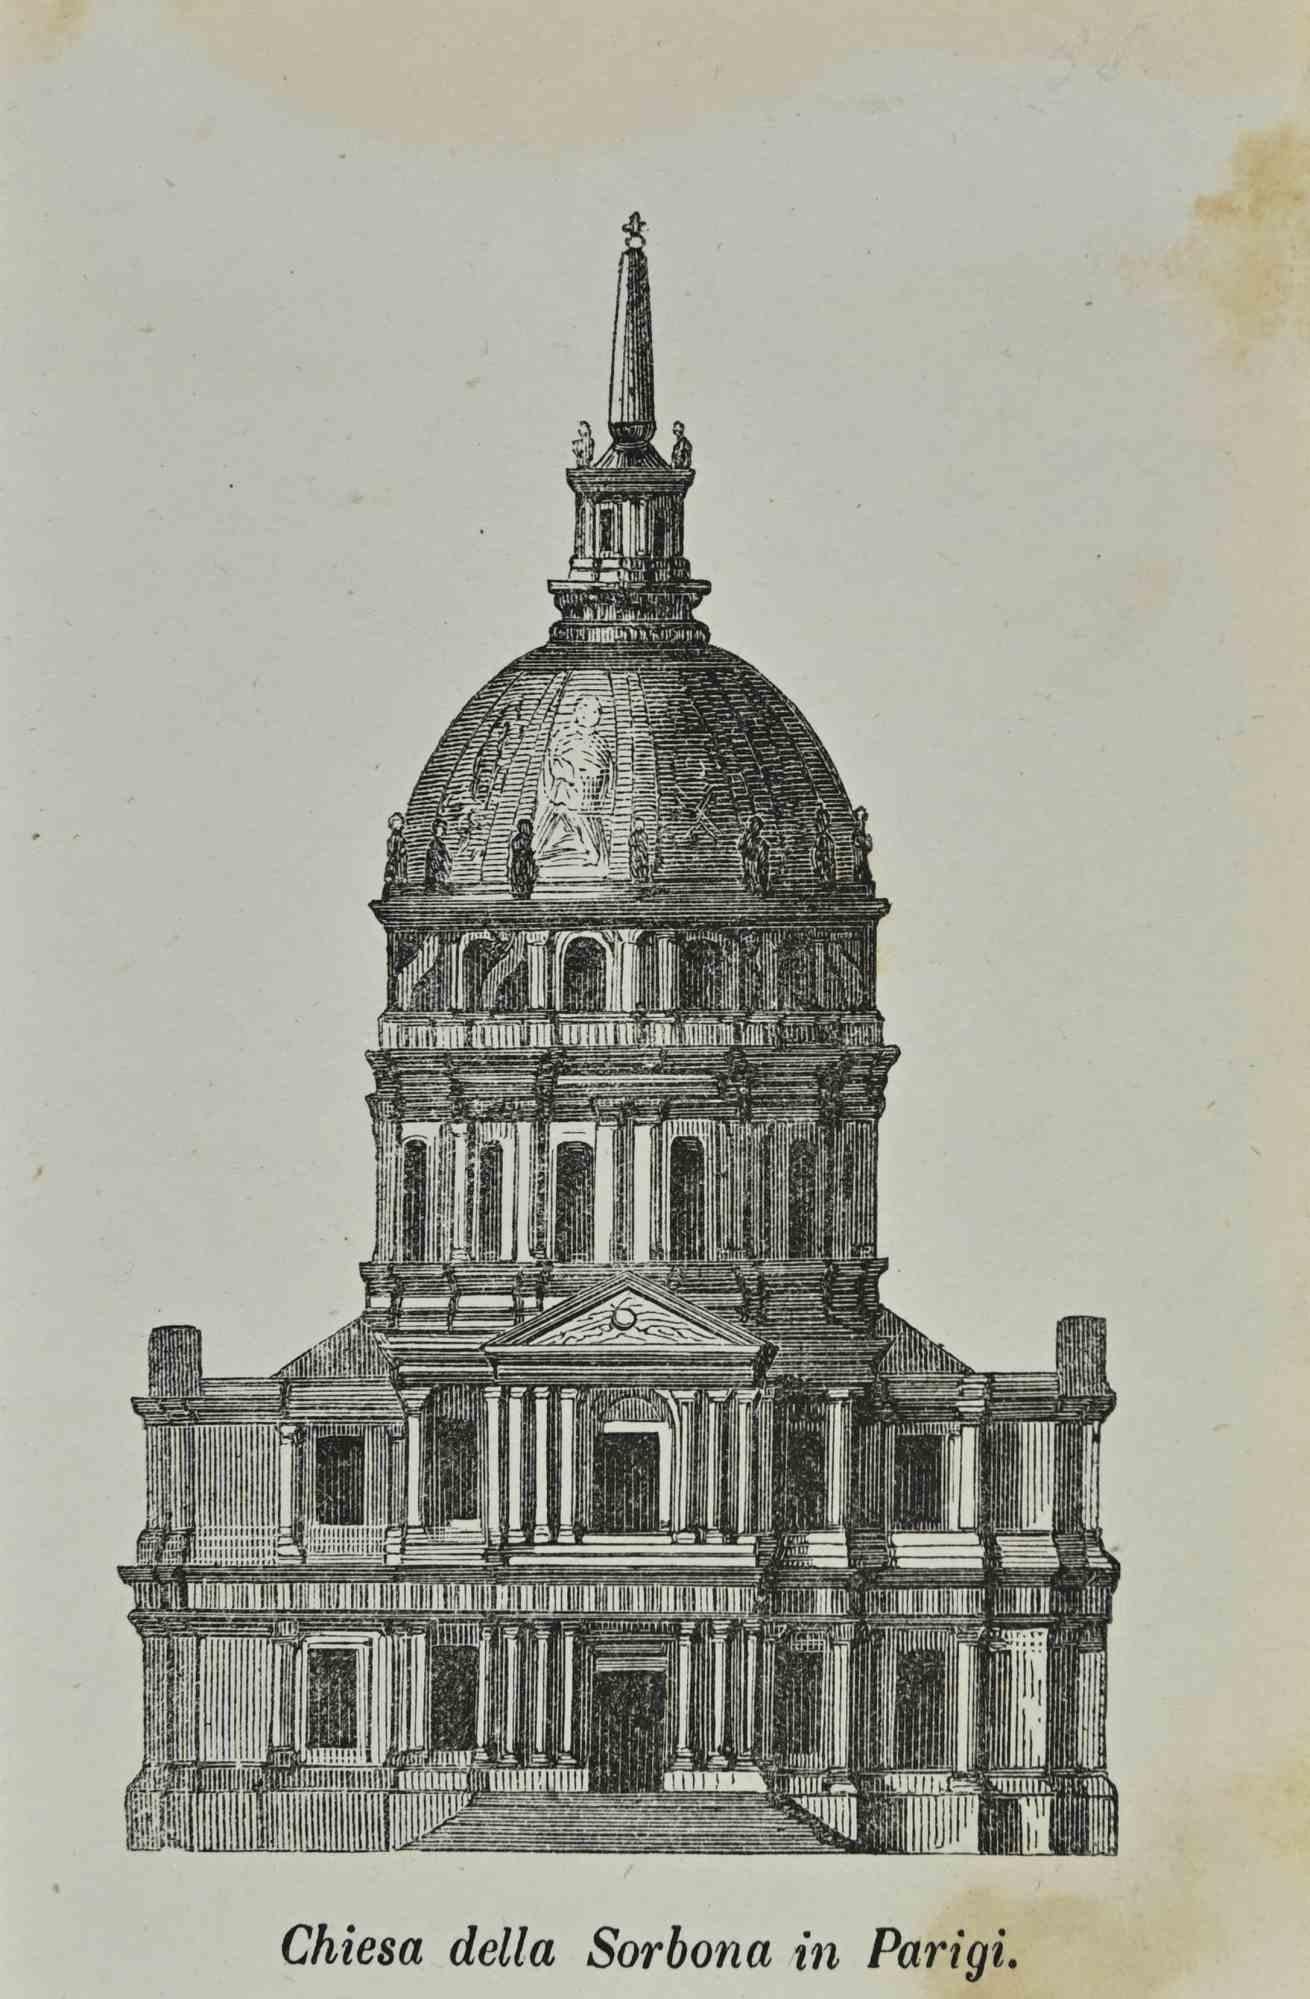 Church of the Sorbonne in Paris is a lithograph made by Auguste Wahlen in 1844.

Good condition.

Drawing in black and white.

At the center of the artwork is the original title "Chiesa della Sorbona in Parigi".

The work is part of Suite Moeurs,